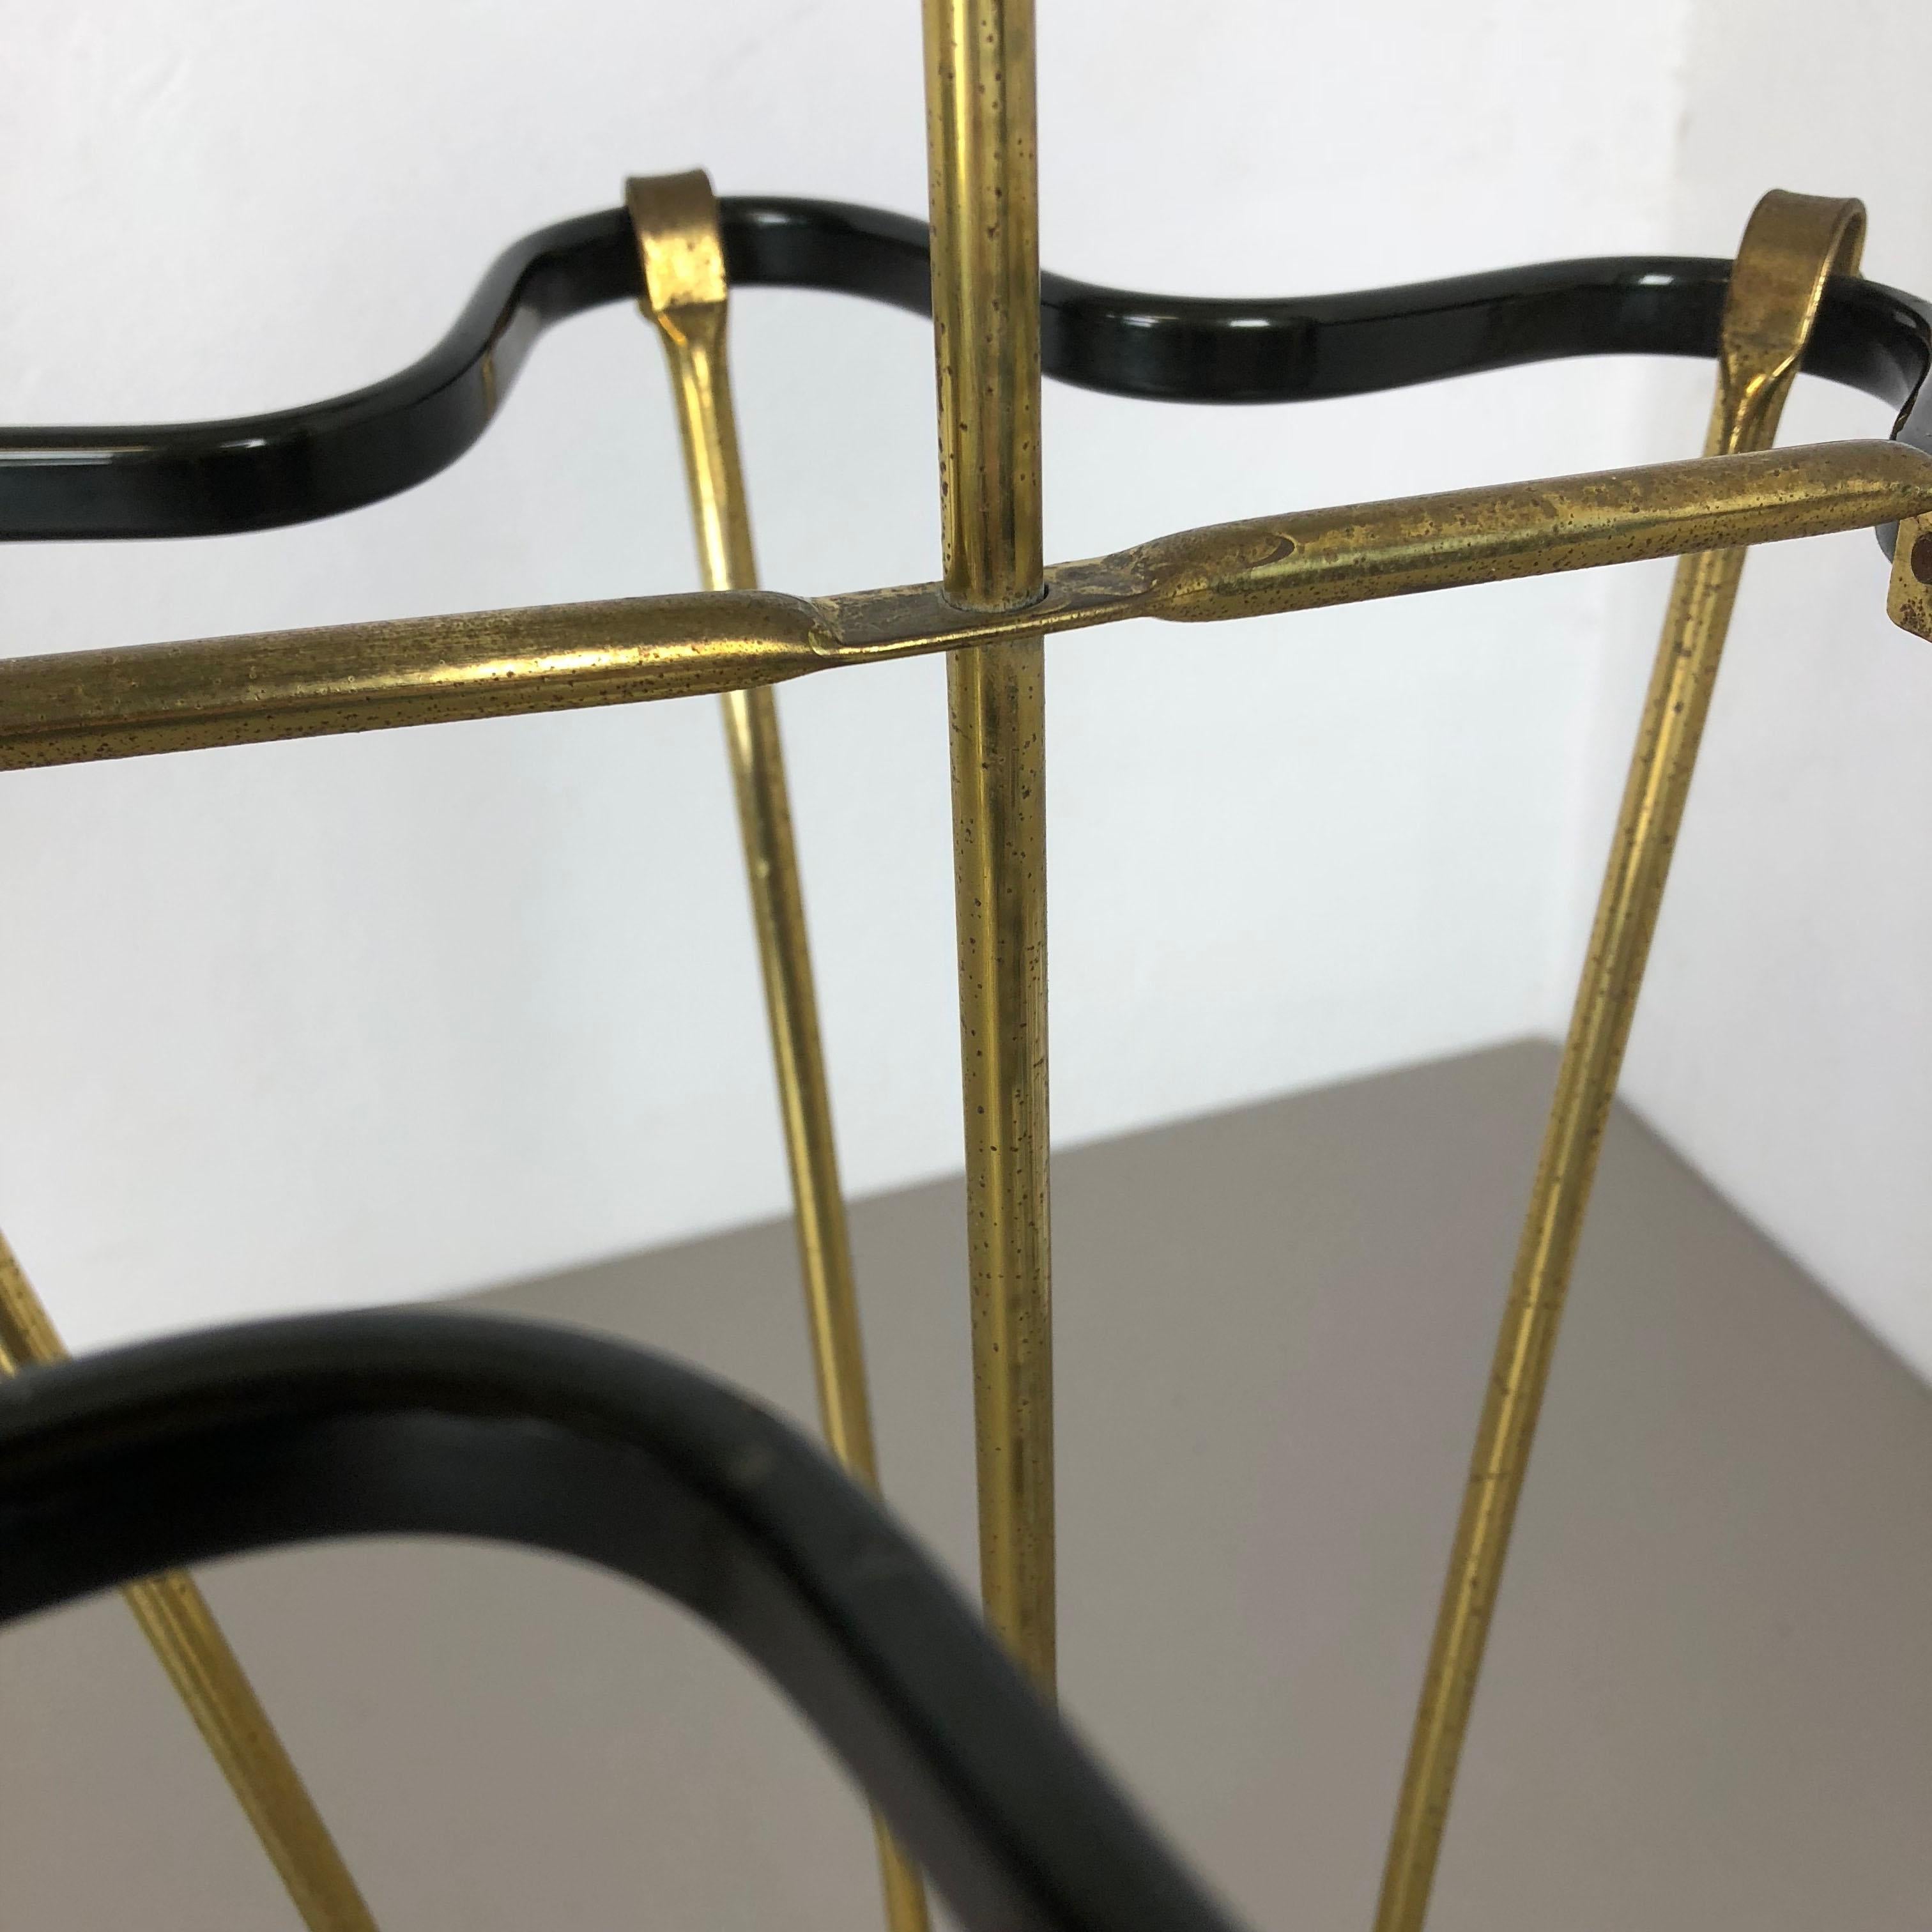 French Midcentury Brass Mategot Style Hollywood Regency Umbrella Stand, France, 1950s For Sale